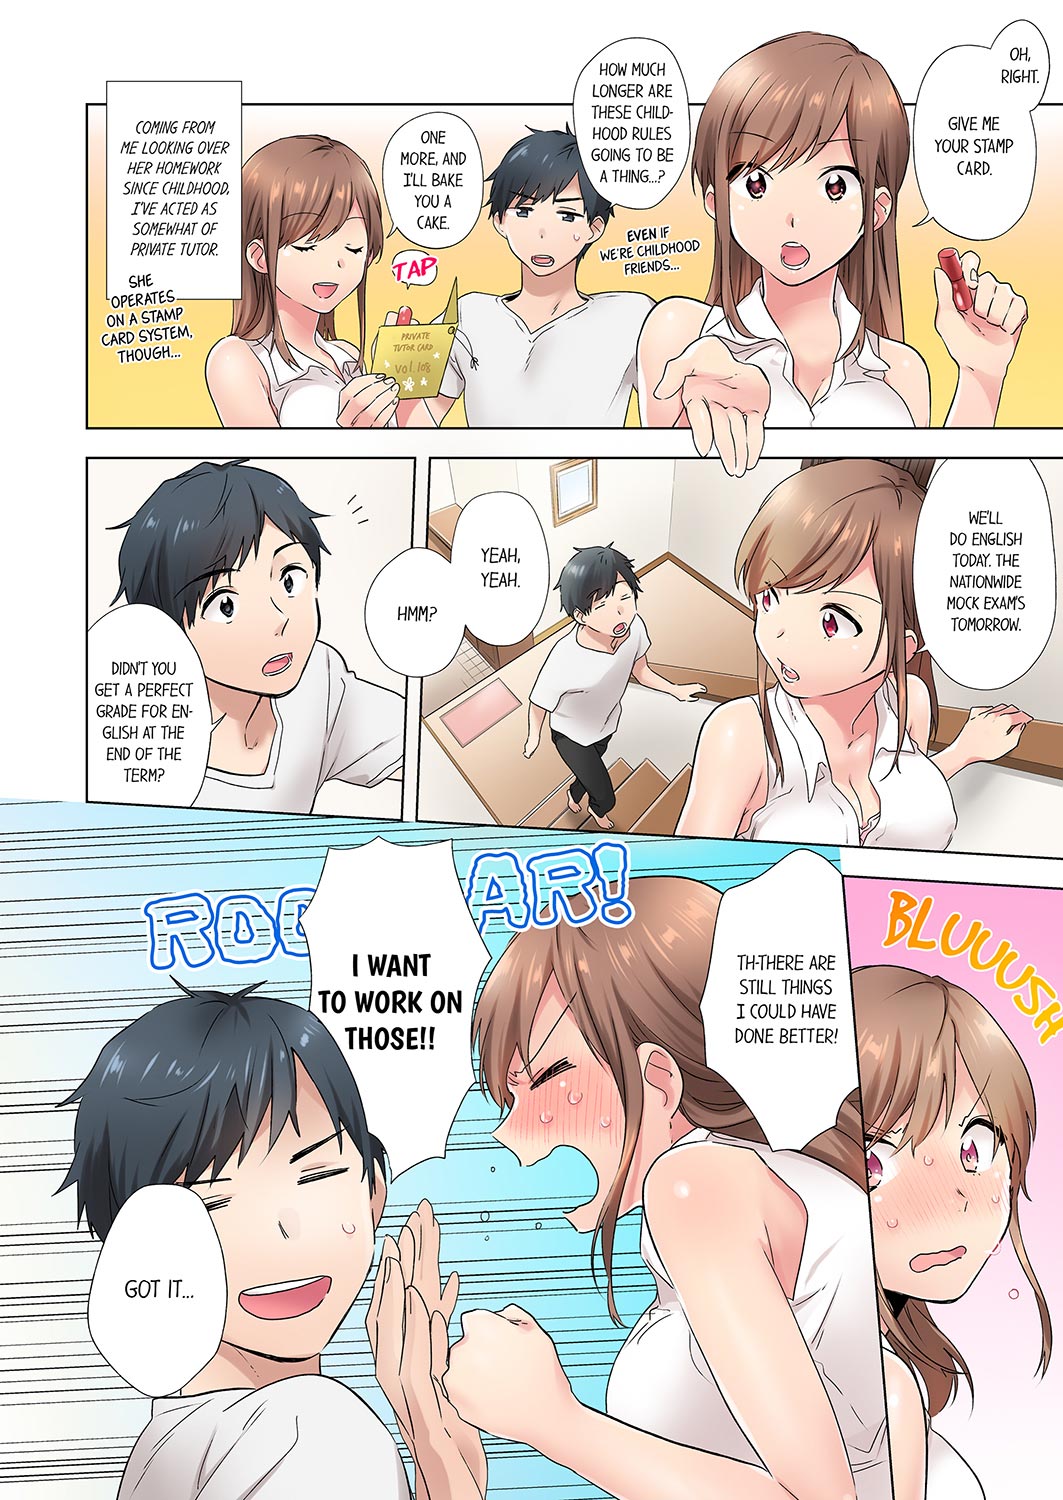 A Scorching Hot Day with A Broken Air Conditioner. If I Keep Having Sex with My Sweaty Childhood Friend… - Chapter 1 Page 2